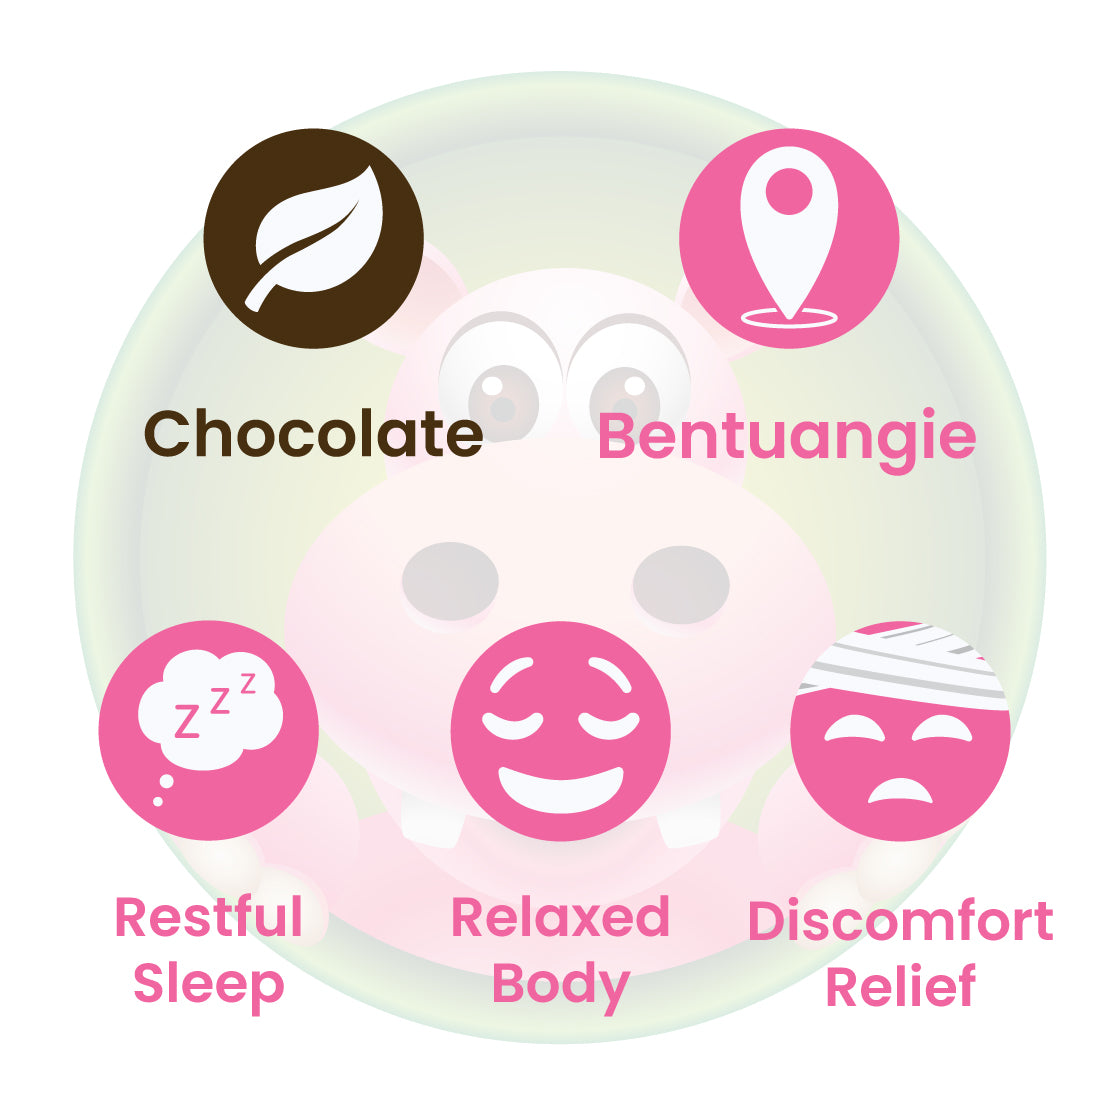 Infographic Details for Happy Hippo Chocolate Bentuangie Kratom Powder. Leaf color: Chocolate (fermented). Kratom Strain Origin: Bentuangie. Kratom Effects resonate with Restful Sleep, Relaxed Body, Discomfort Relief..